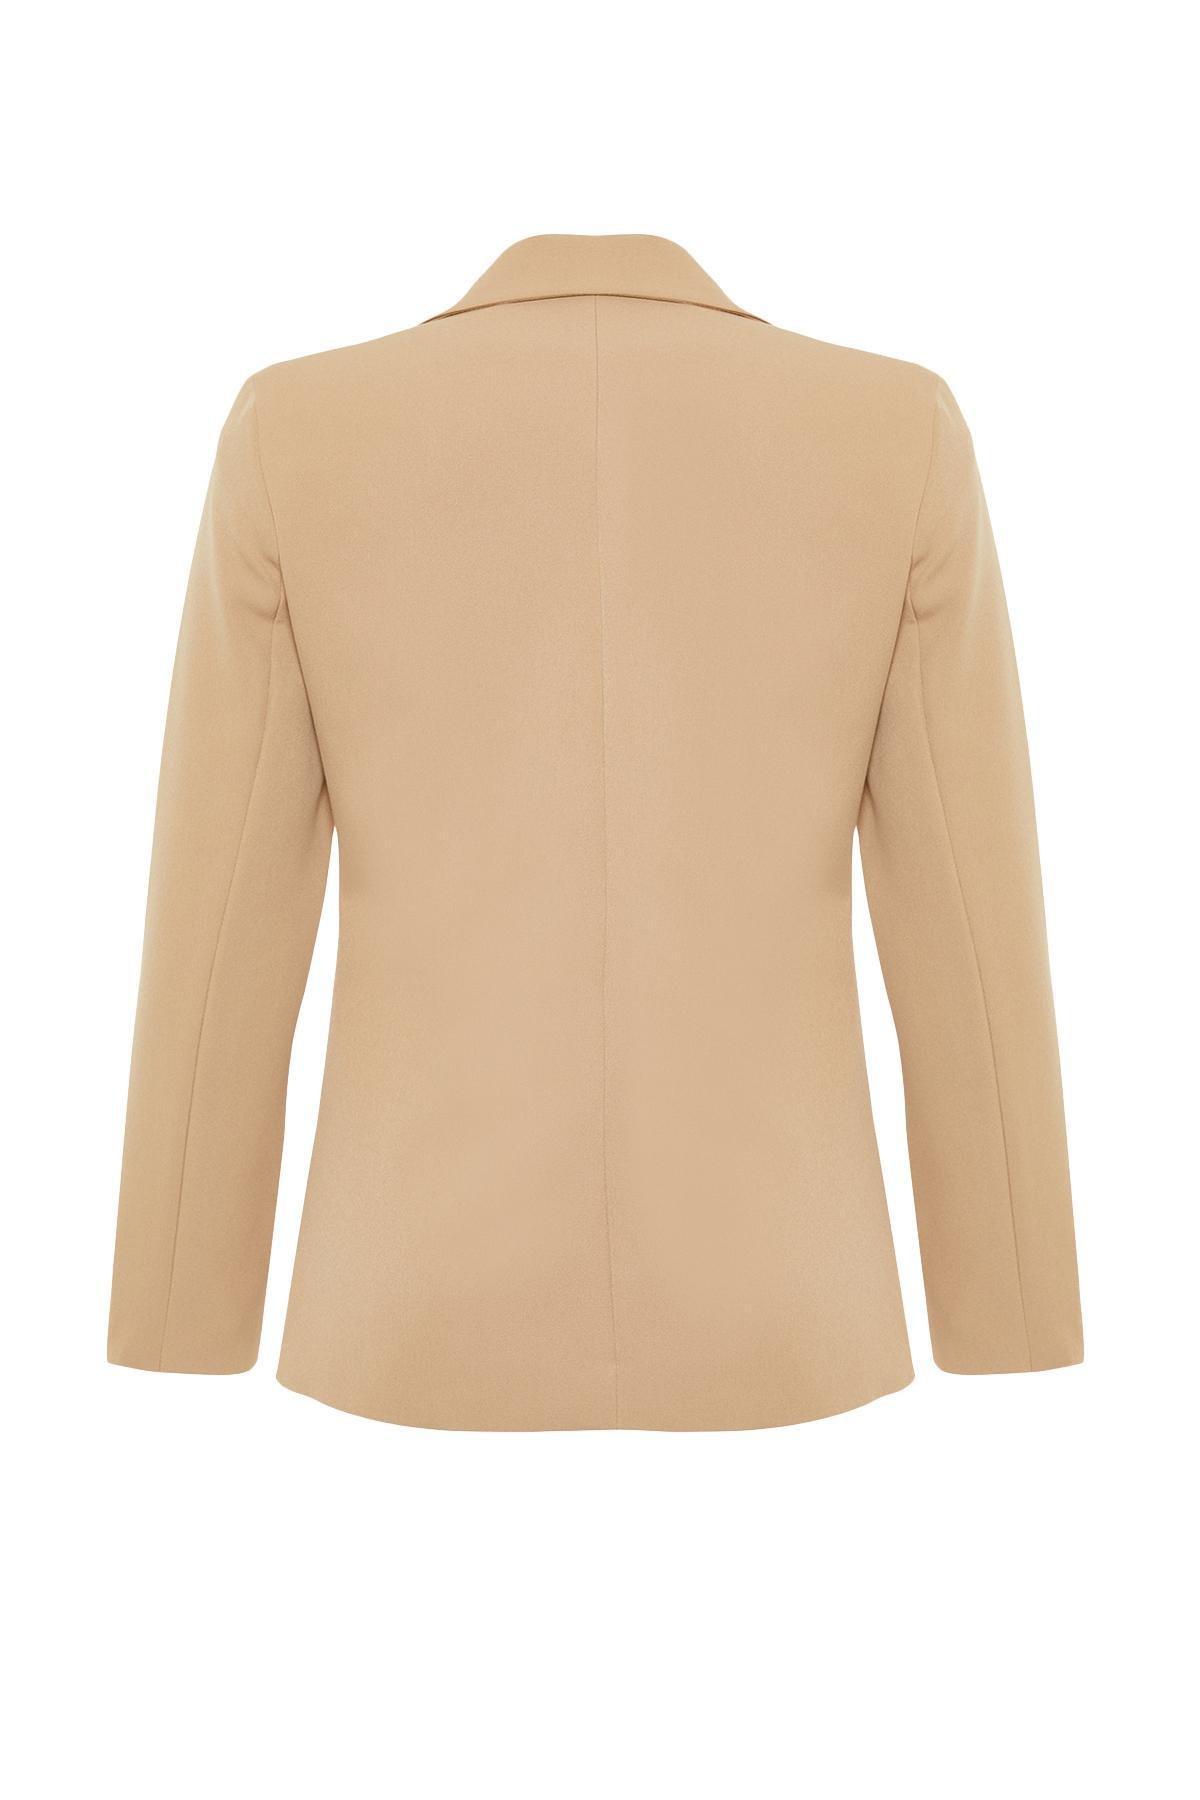 Trendyol - Brown Lined Double Breasted Blazer